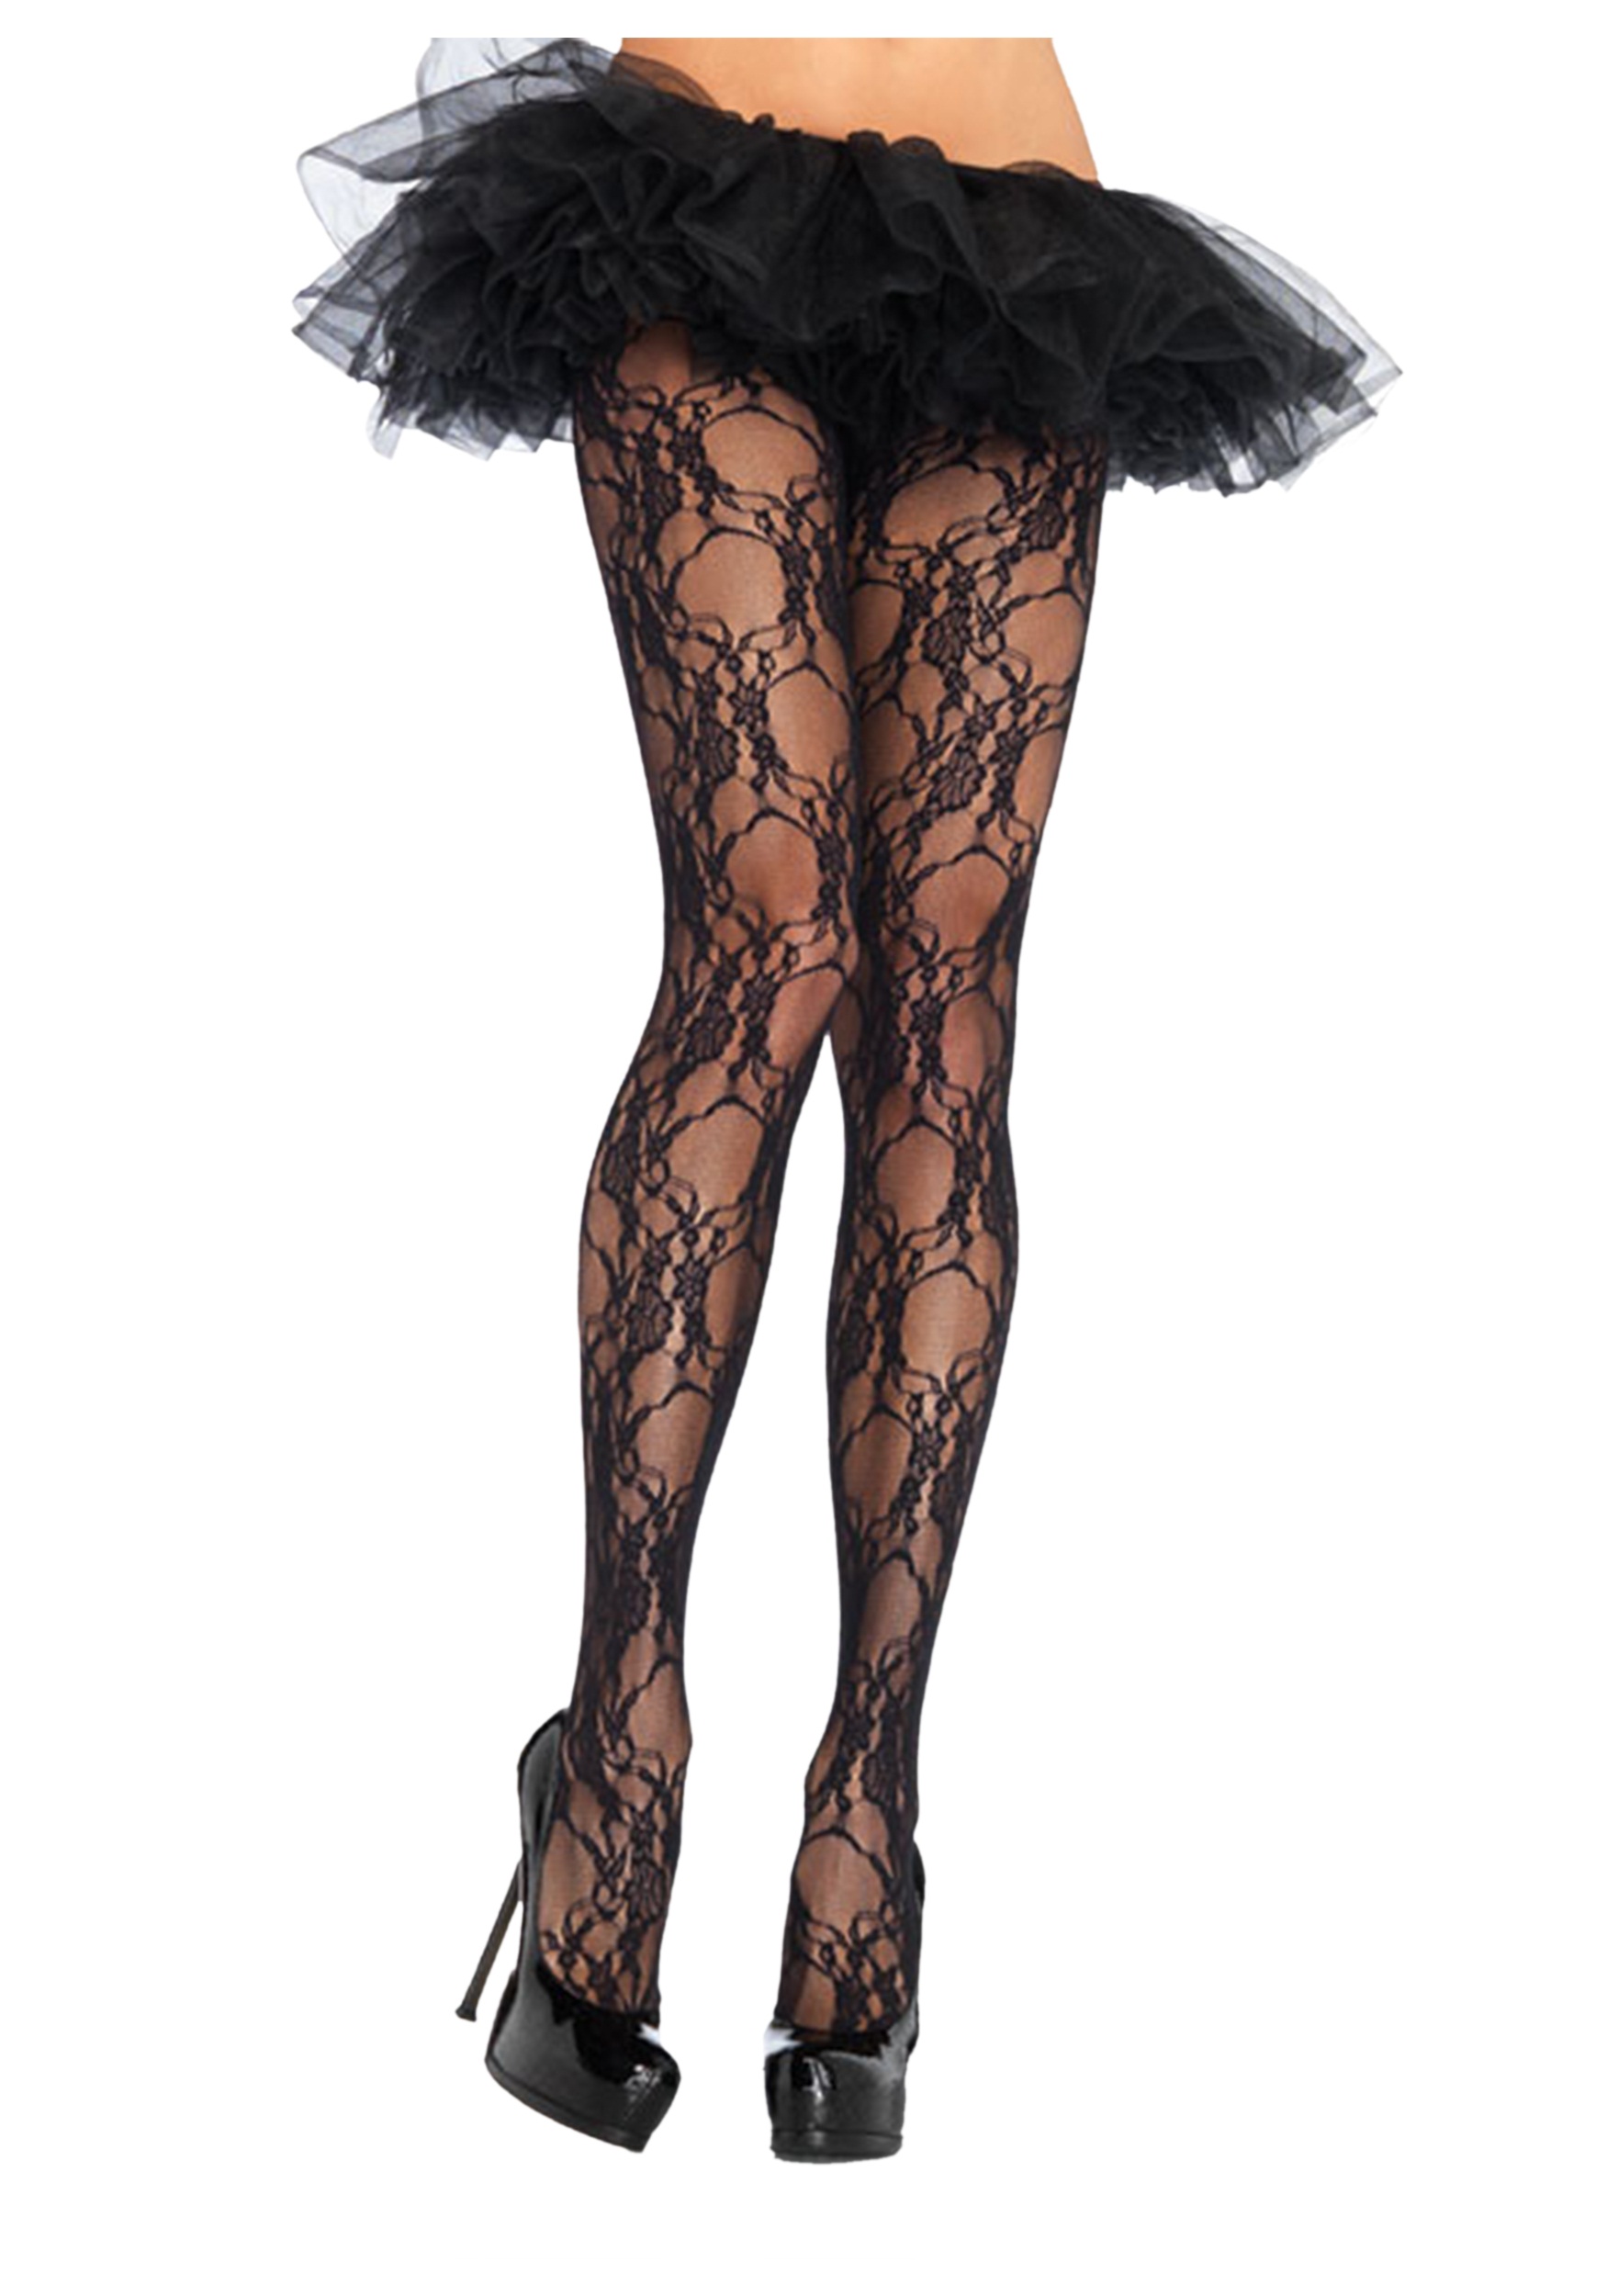 Floral Lace Pantyhose Thigh High Stockings